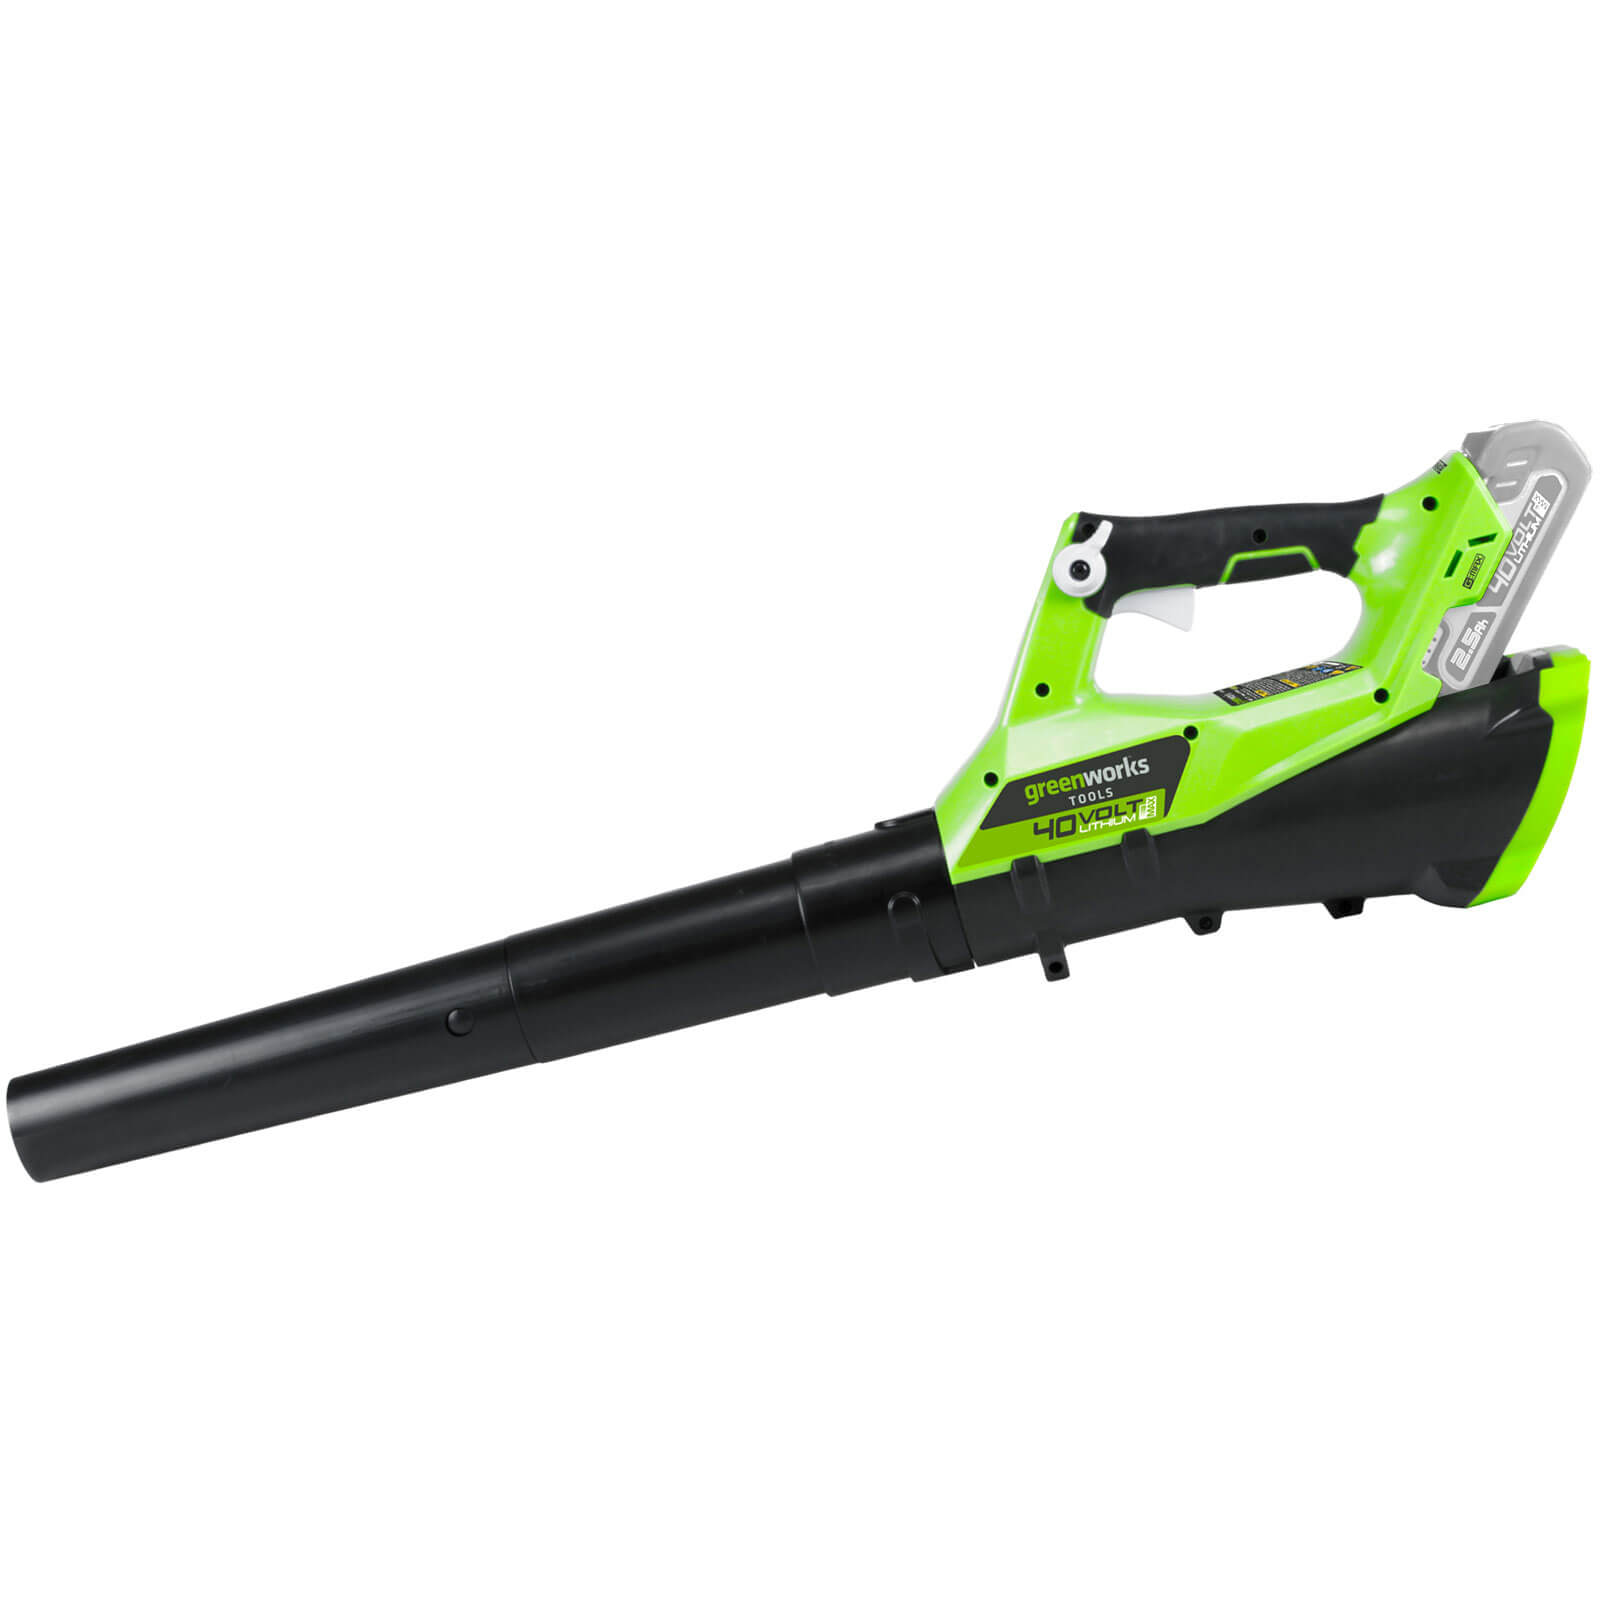 Photo of Greenworks G40ab 40v Cordless Axial Garden Leaf Blower No Batteries No Charger